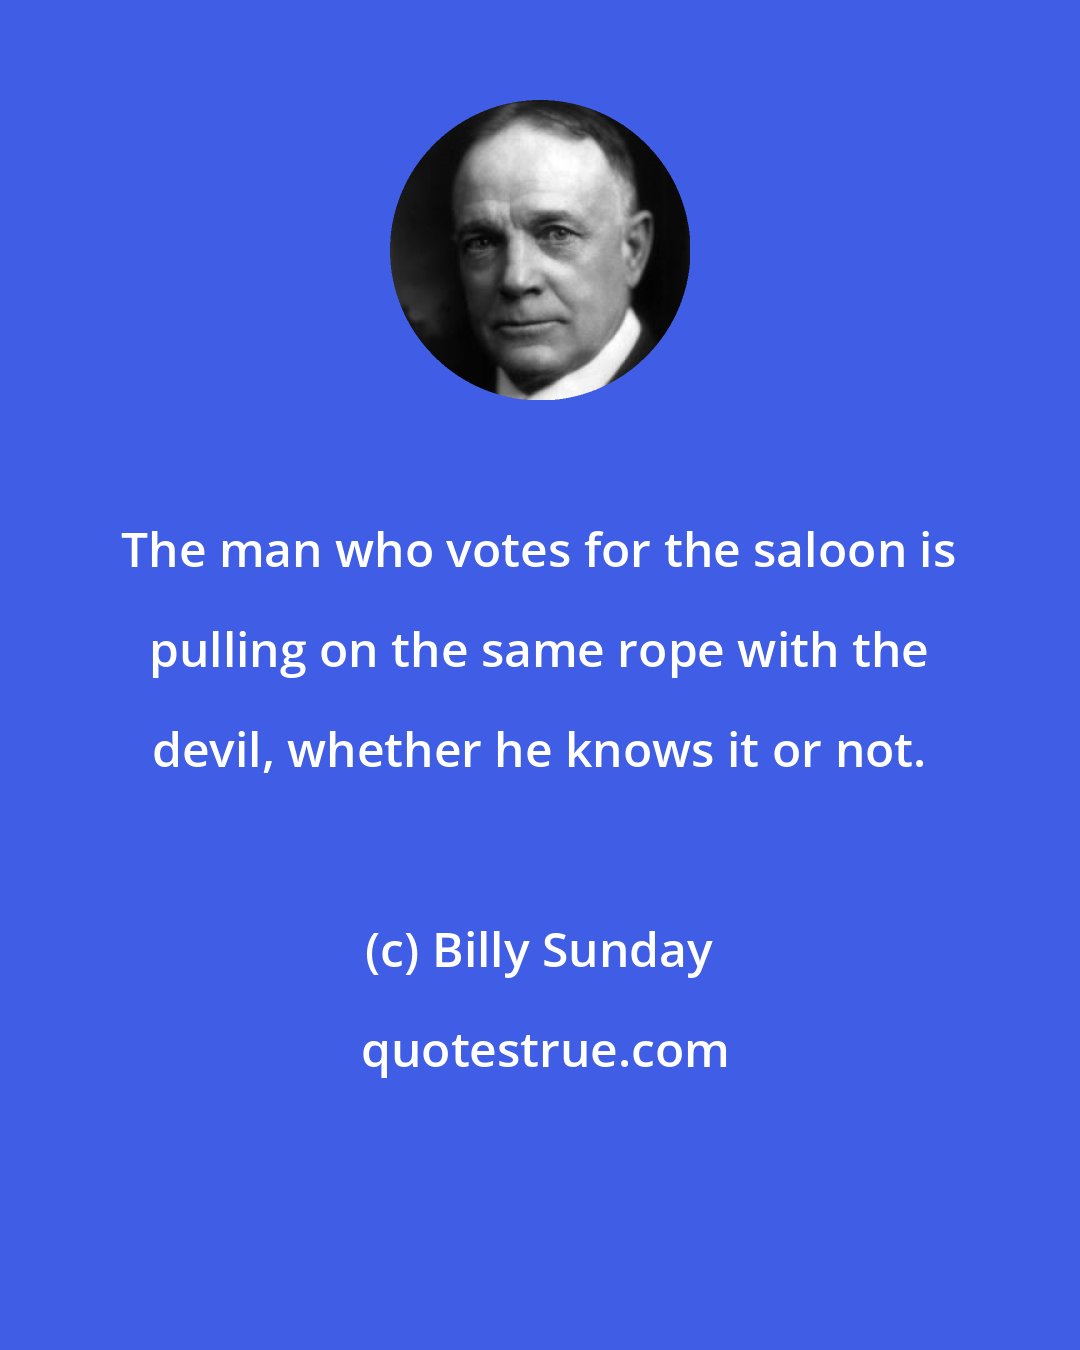 Billy Sunday: The man who votes for the saloon is pulling on the same rope with the devil, whether he knows it or not.